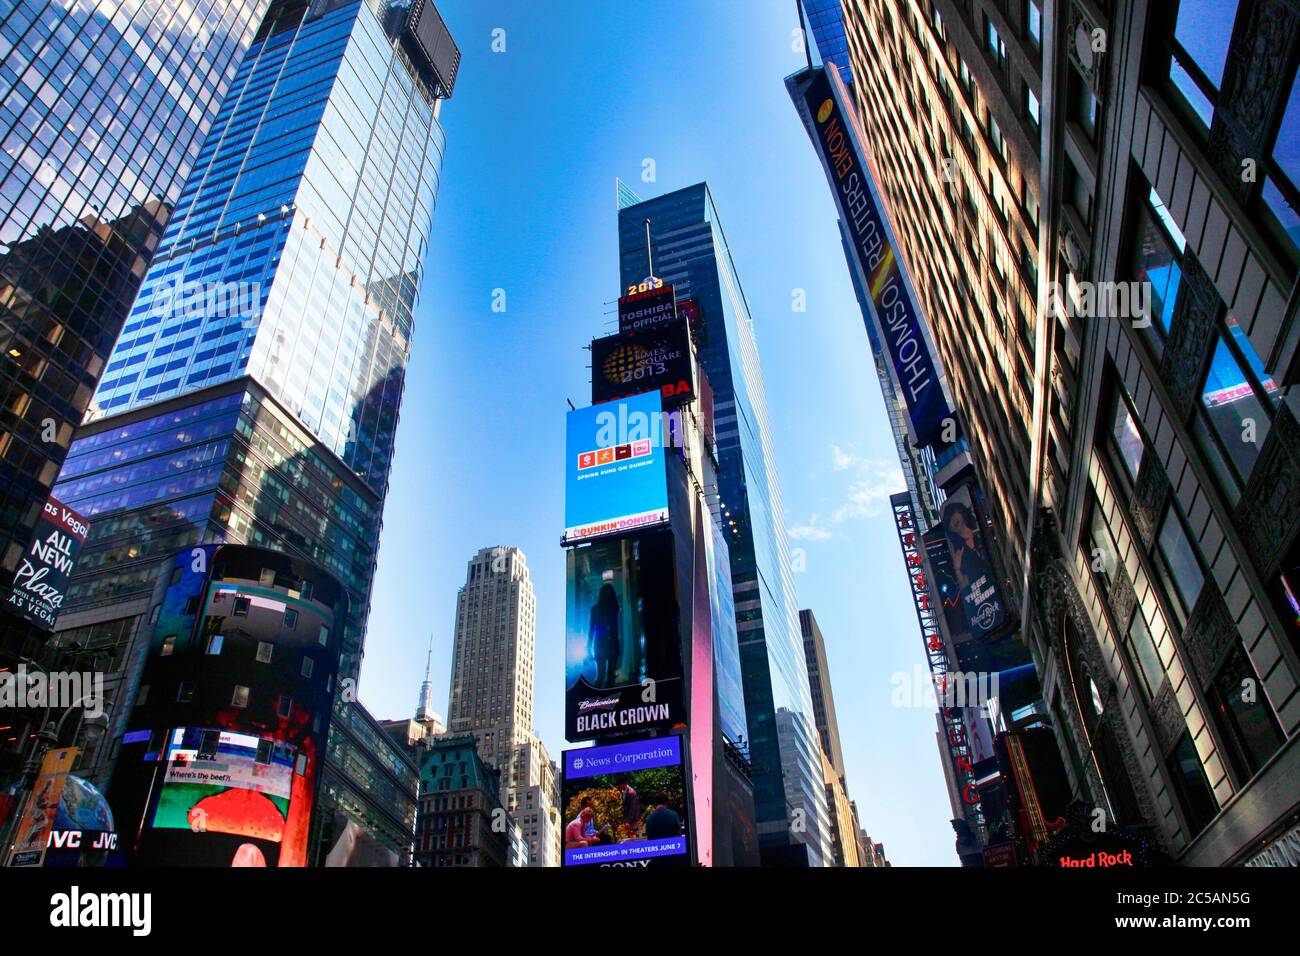 New York, NY, USA - May 16, 2013: Times Square, featured with Broadway Theaters and huge number of LED signs, is a symbol of New York City and the Uni Stock Photo